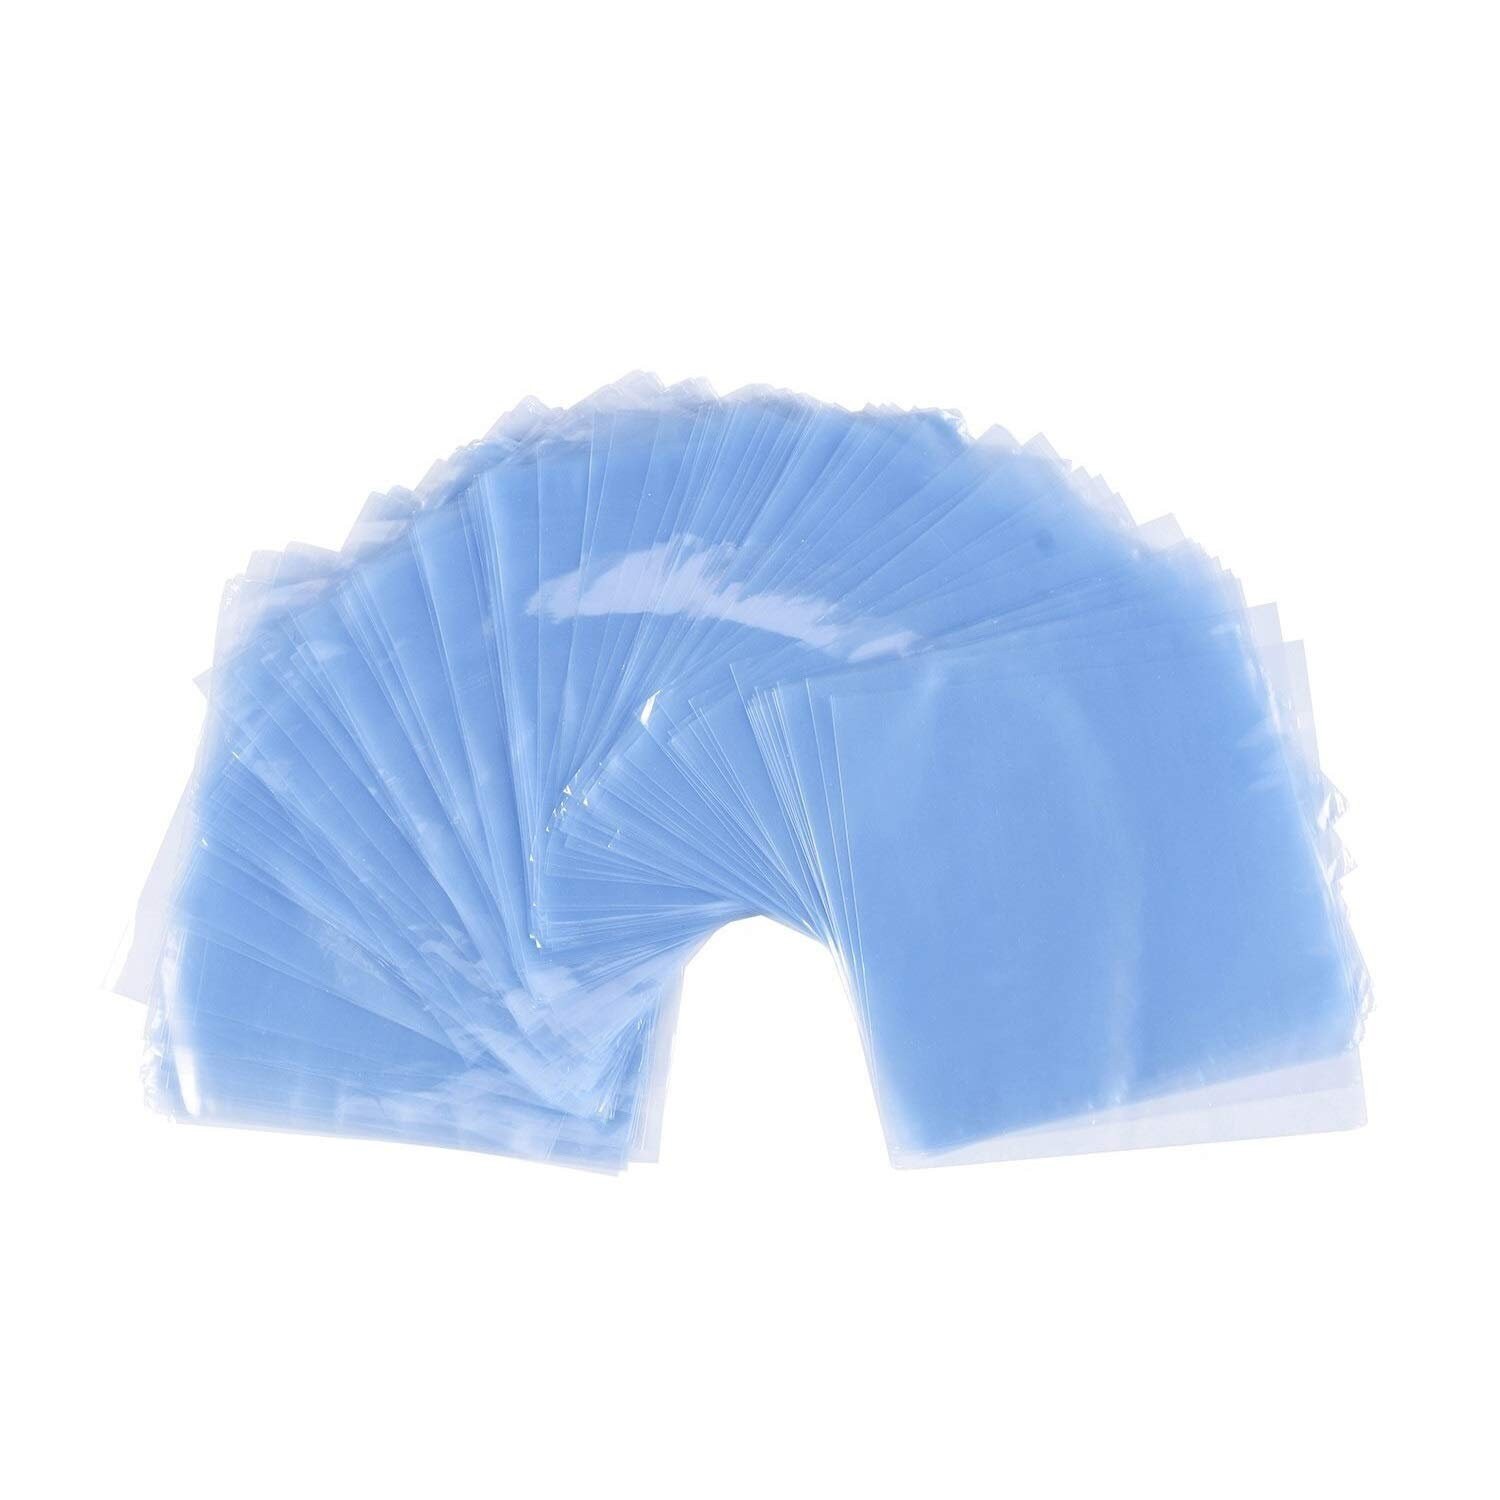 PVC Heat Shrink Wrap Bags Clear 100 Guage 12x16 inch Odorless 100 Pack 